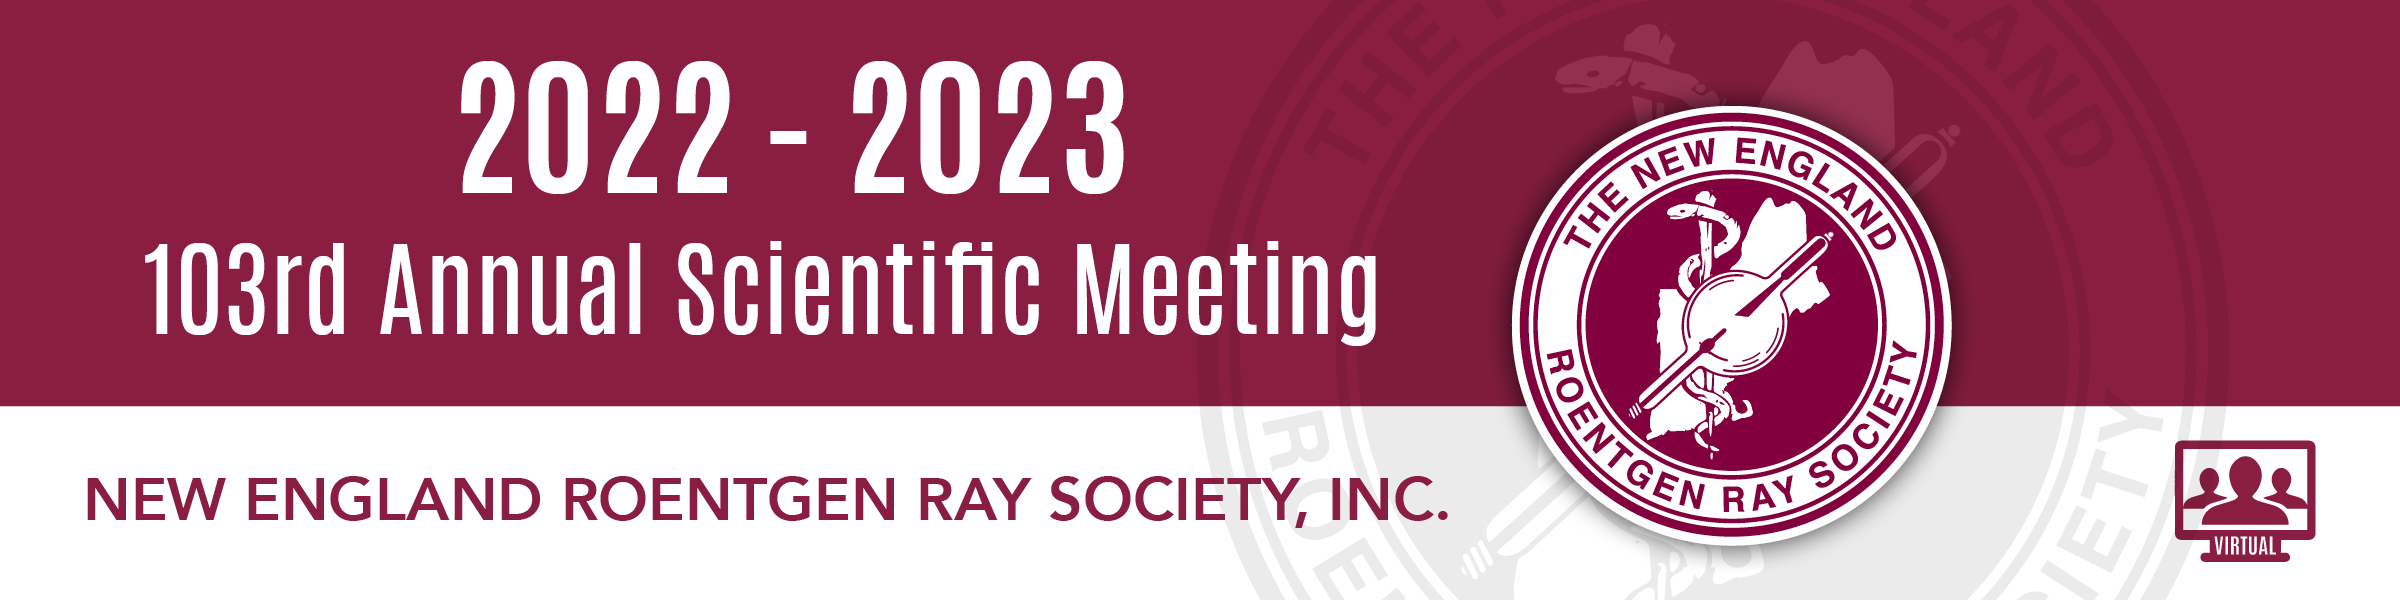 nerrs-annual-meeting-2023-banner